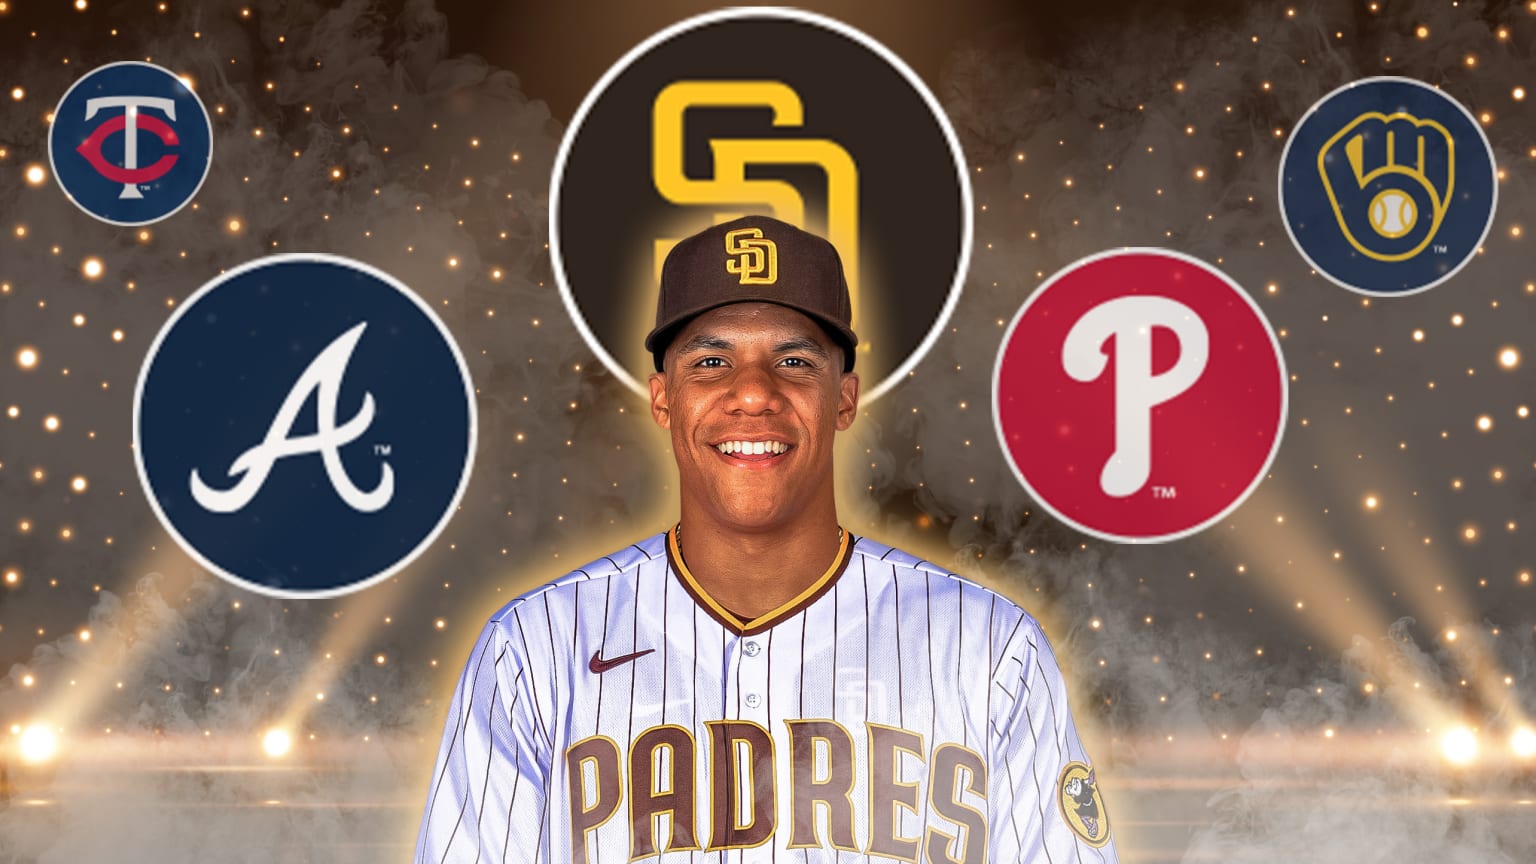 Juan Soto, smiling, in a Padres uniform and a Padres logo behind his head. Logos of the Twins, Braves, Phillies and Brewers are arranged in circles, all over a background of spotlights and fog